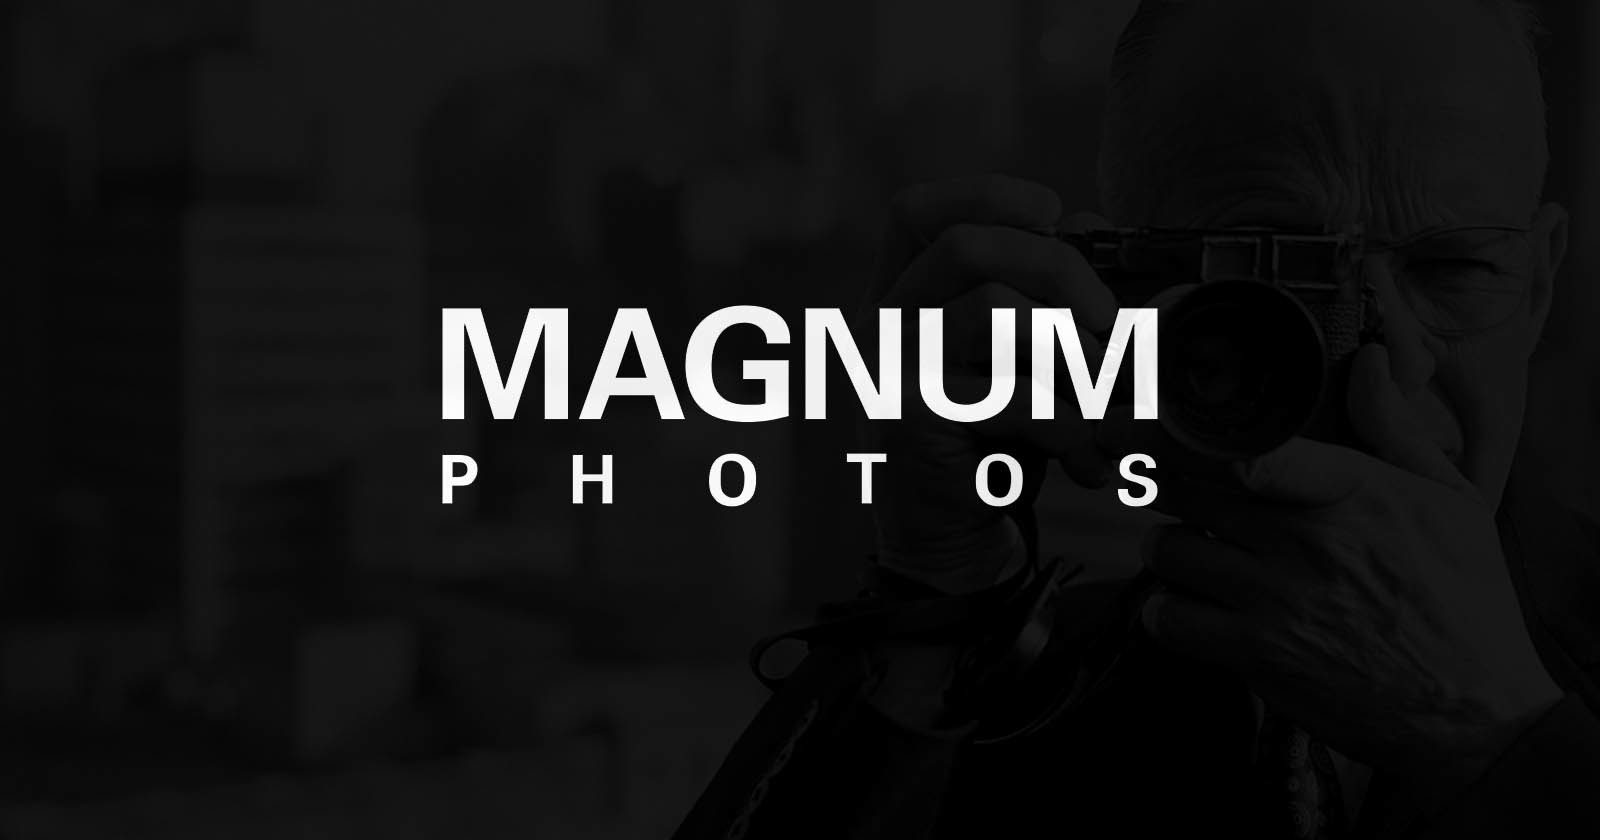 Magnum Photos Publicly Calls For Journalist Slayings to End